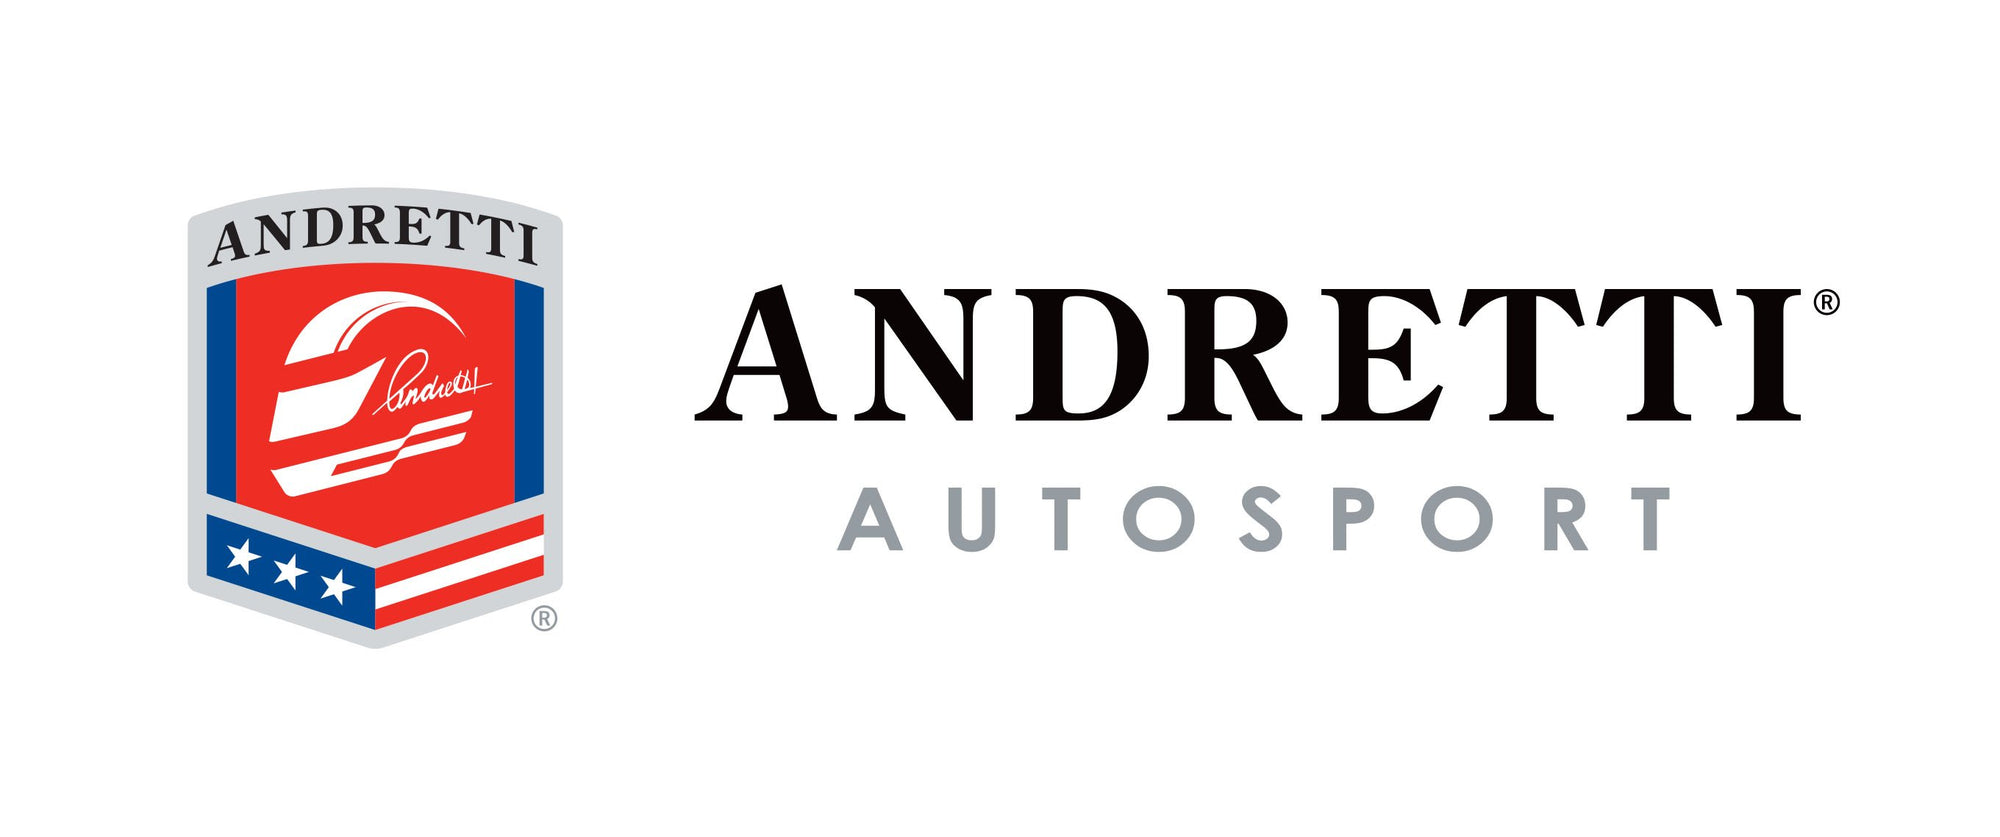 Cutting Edge Automotive Solutions Partners with Andretti Autosport